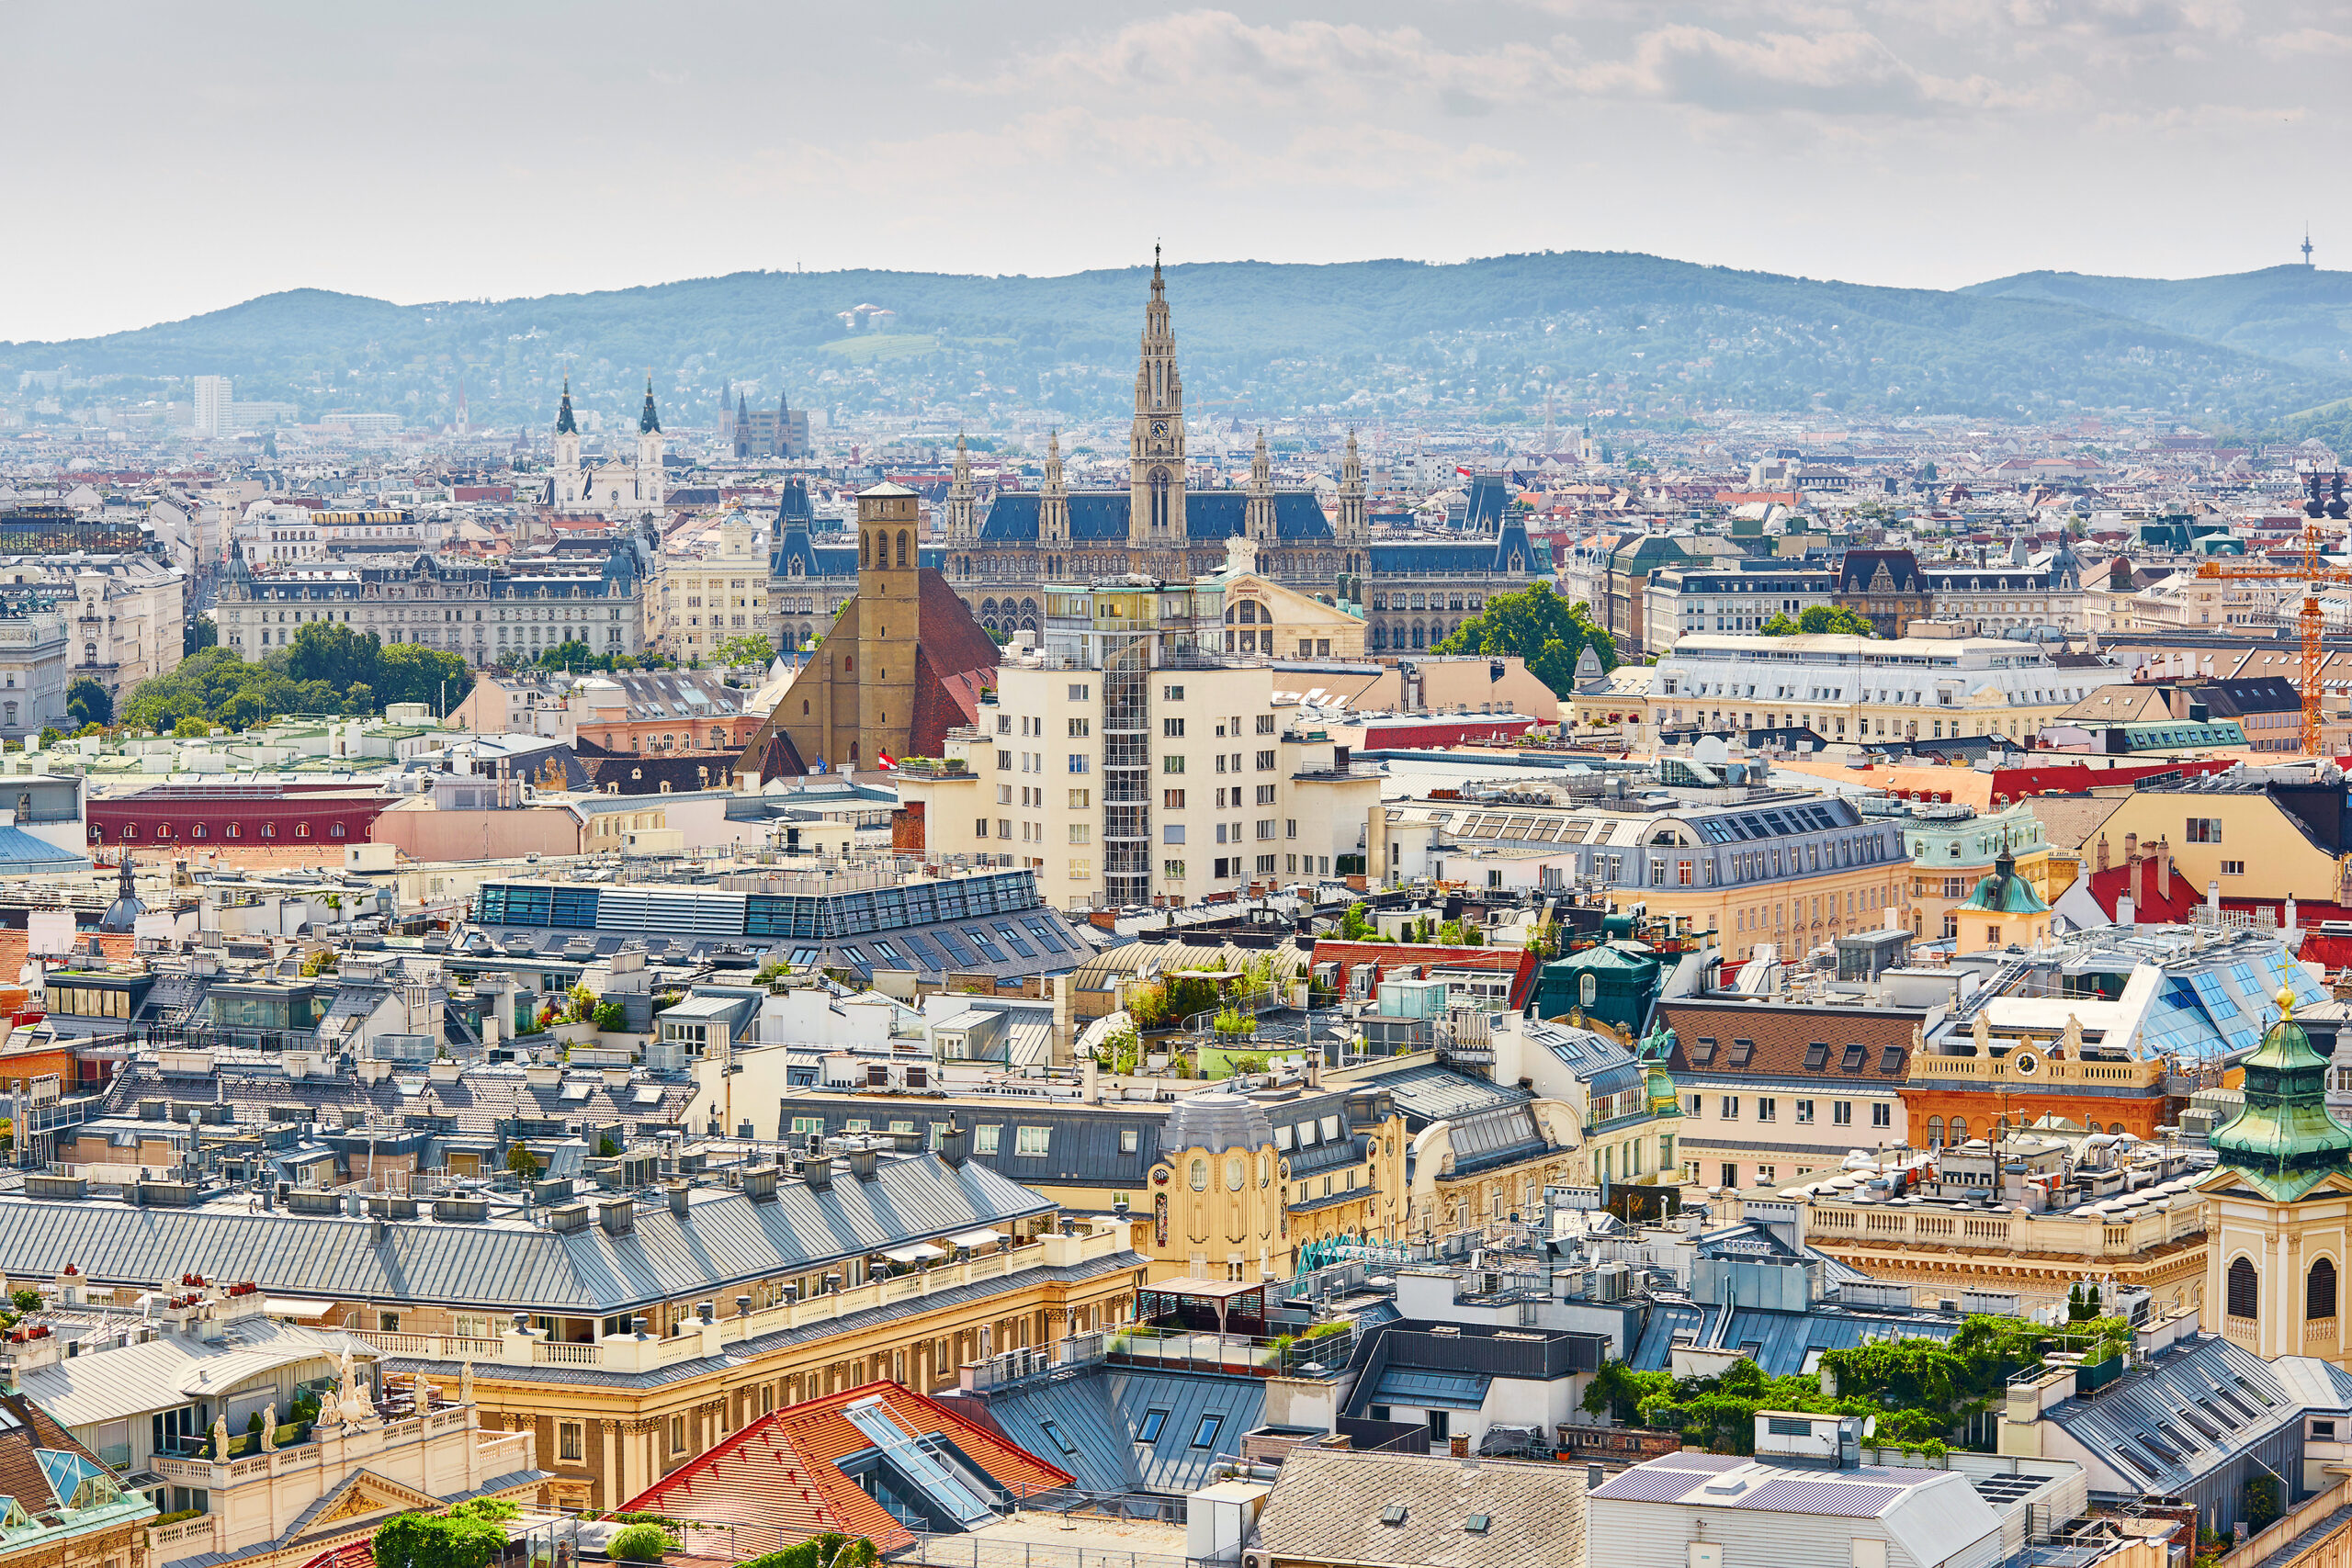 Aerial scenic view of city center of Vienna seen from St. Stephen's Cathedral in Austria